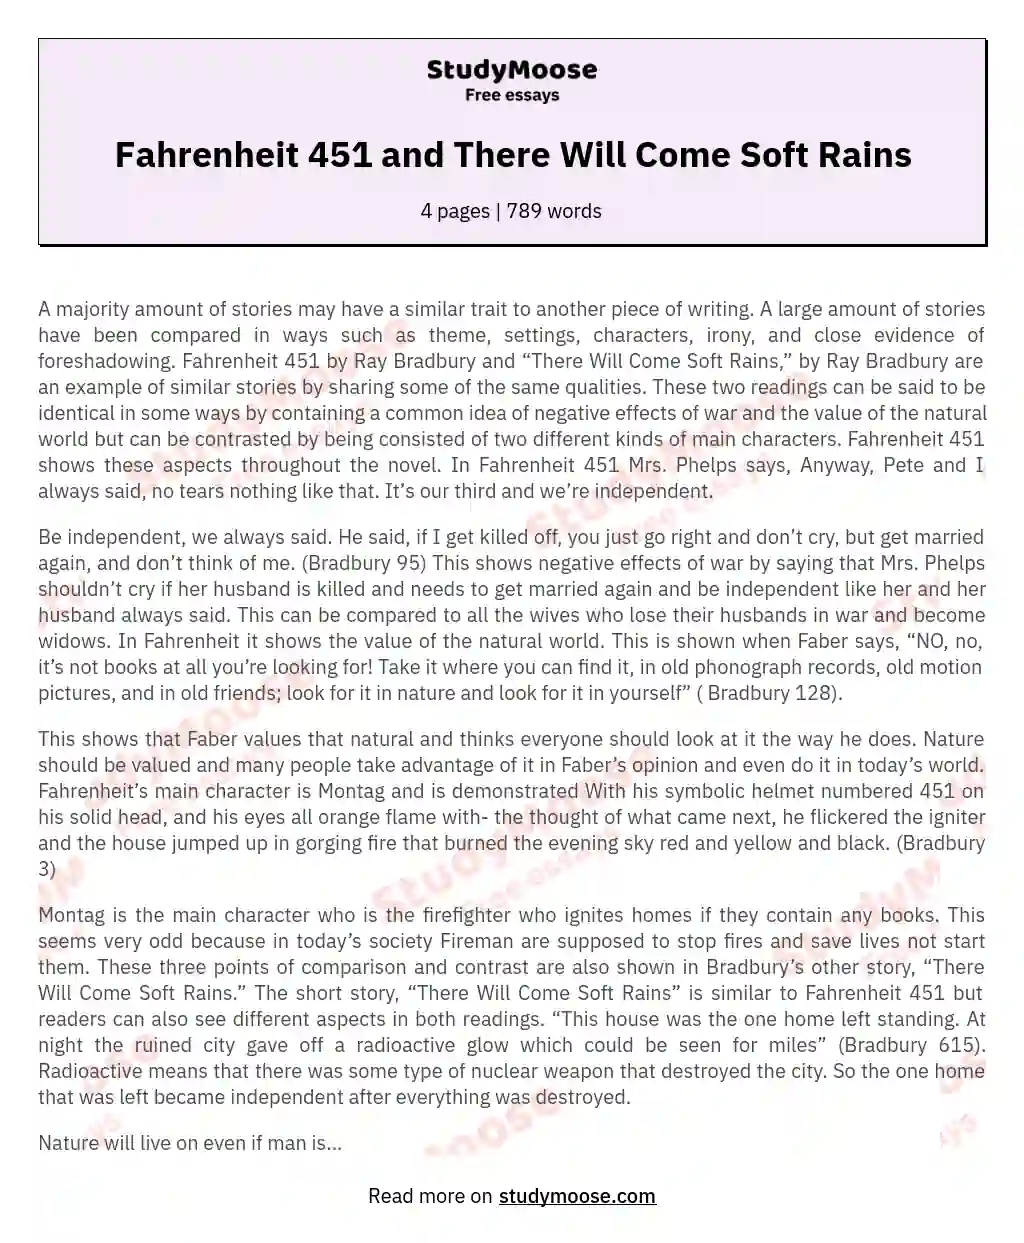 Fahrenheit 451 and There Will Come Soft Rains